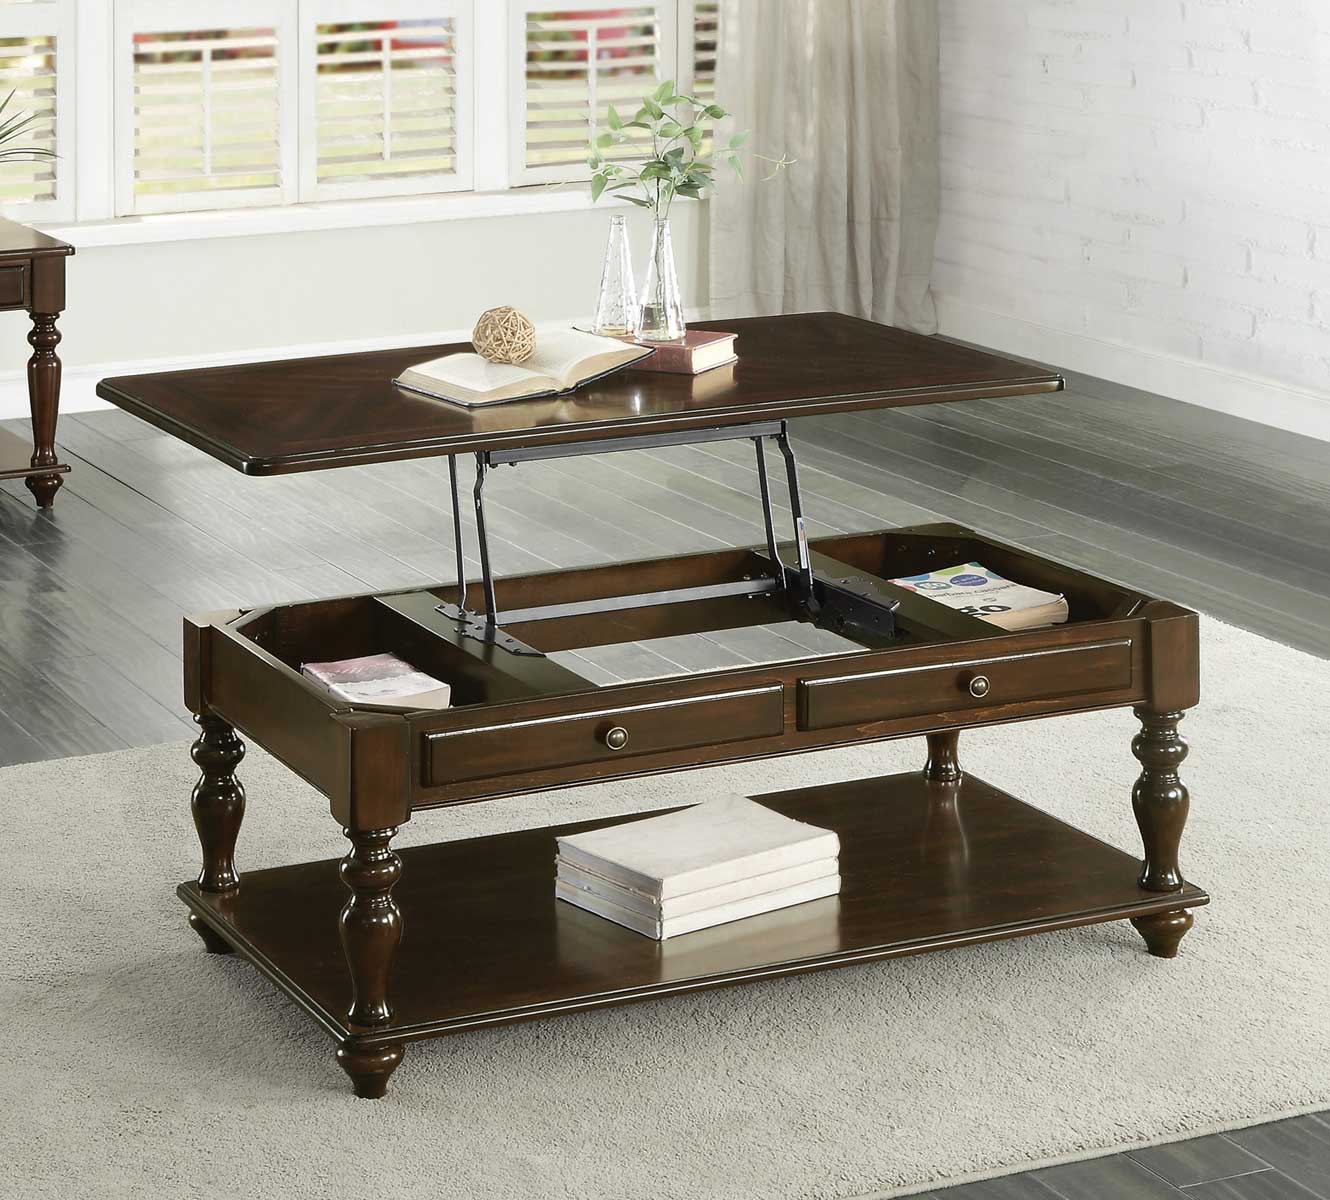 Homelegance Lovington Cocktail Table with Lift Top on Casters - Espresso